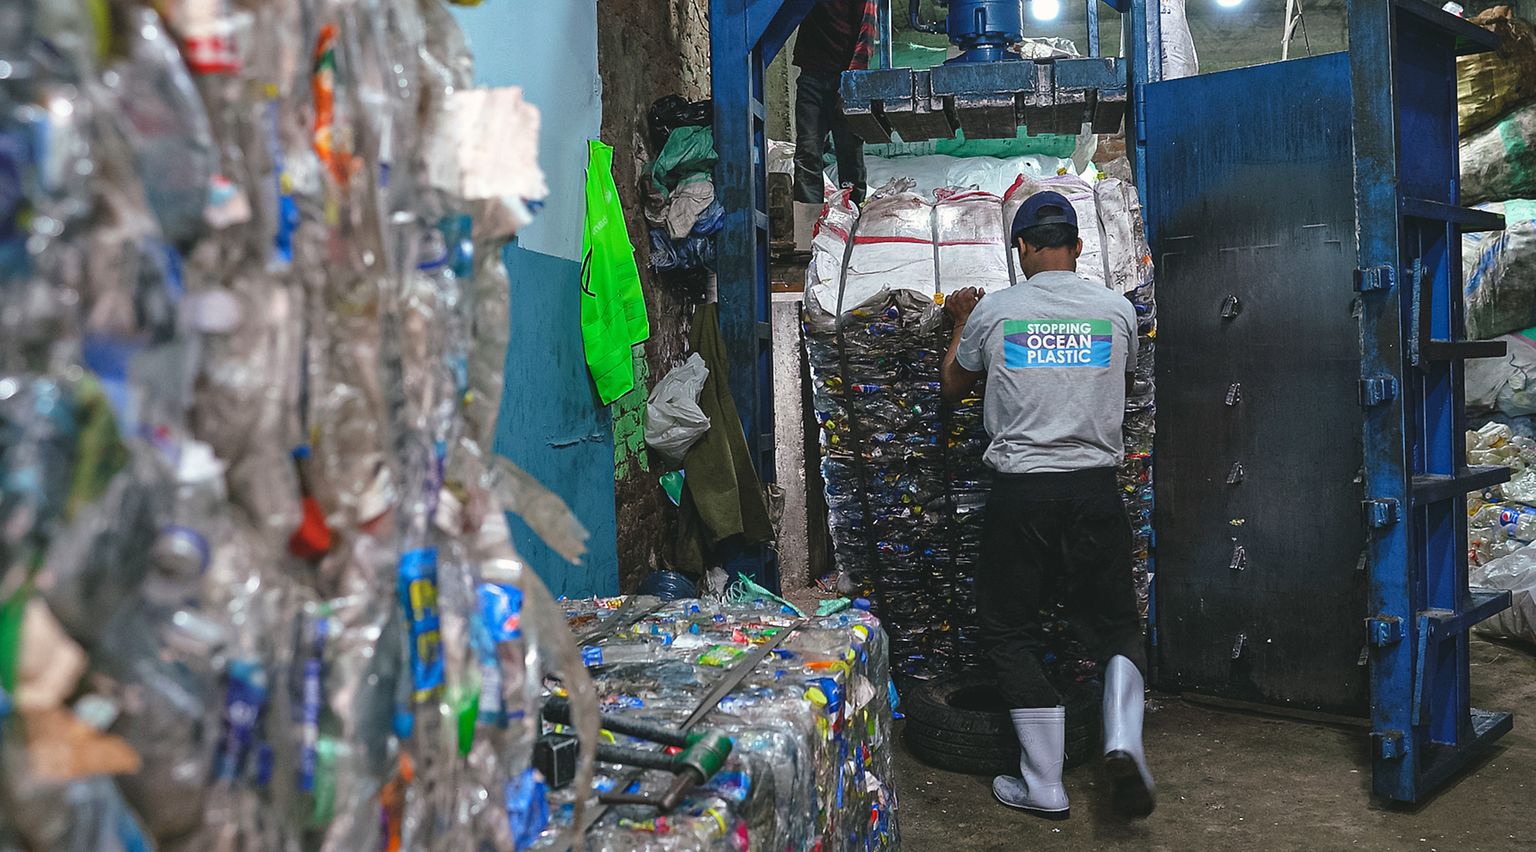 By 2023, the partners aim to achieve an annual capacity for 5,000 tons of plastic waste